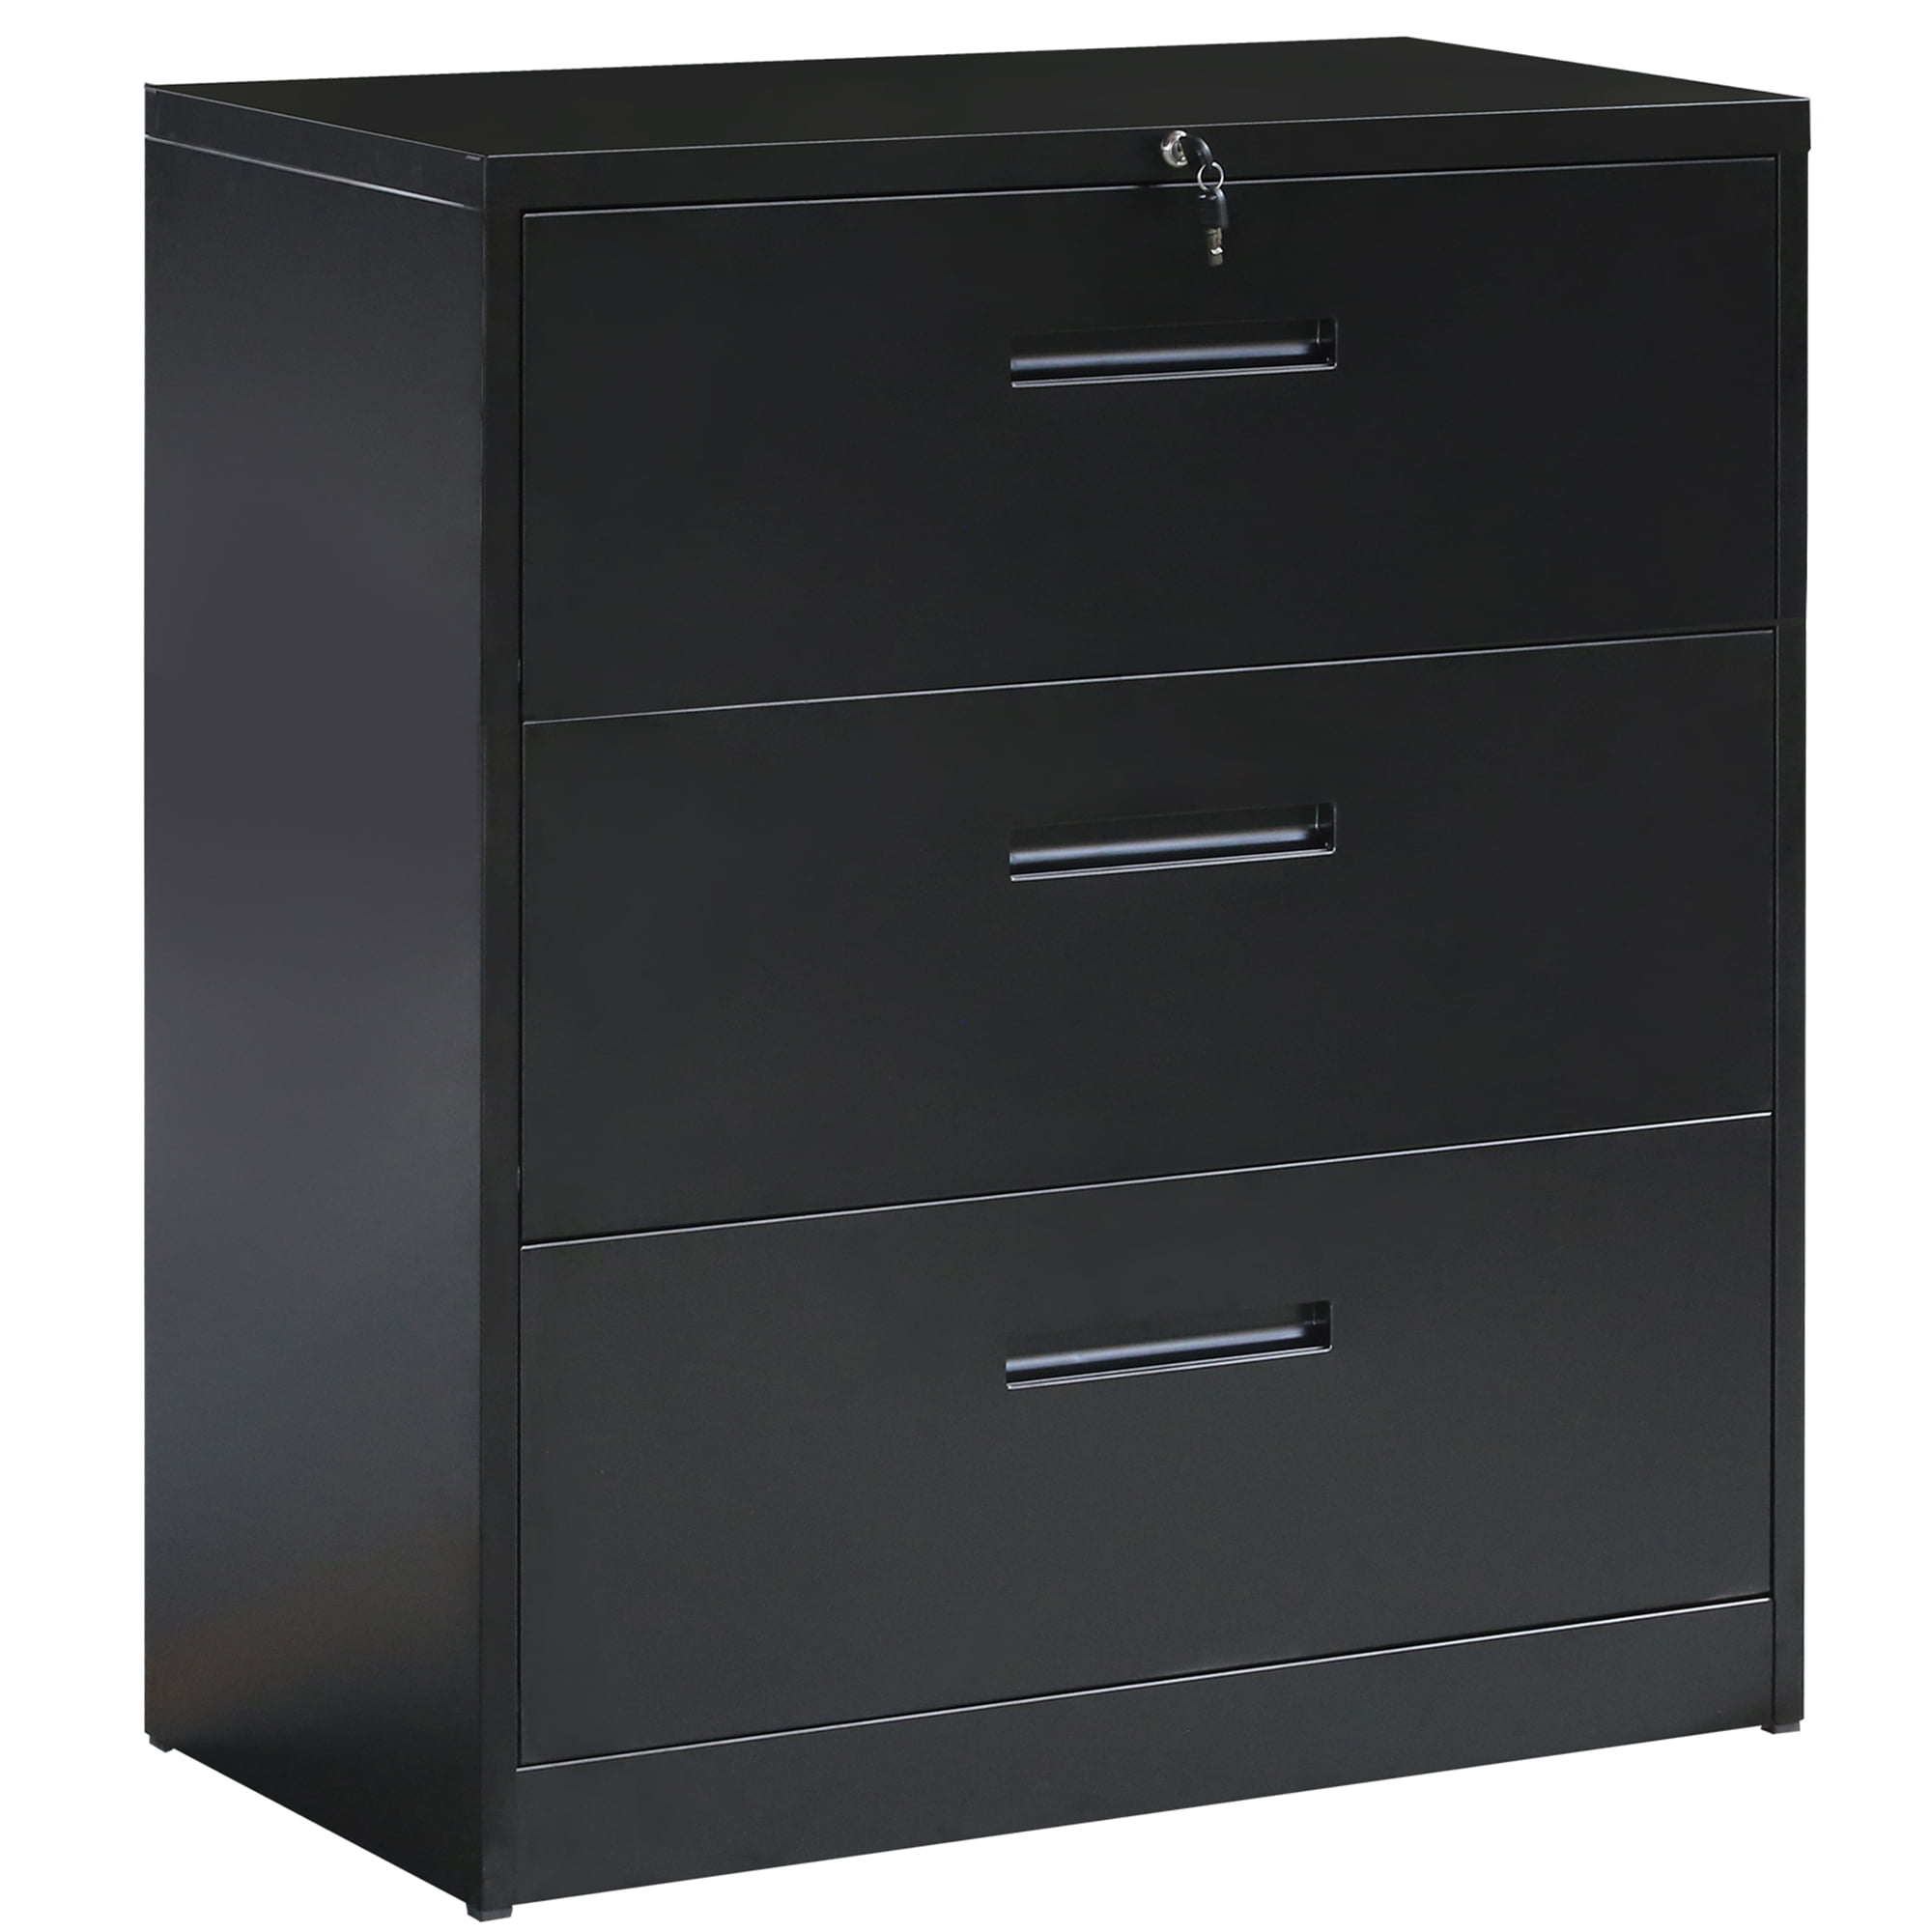 Lockable Filing Cabinet Metal Organizer Heavy Duty Hanging File Office Home Storage 4 Drawer lateral File Cabinet Black